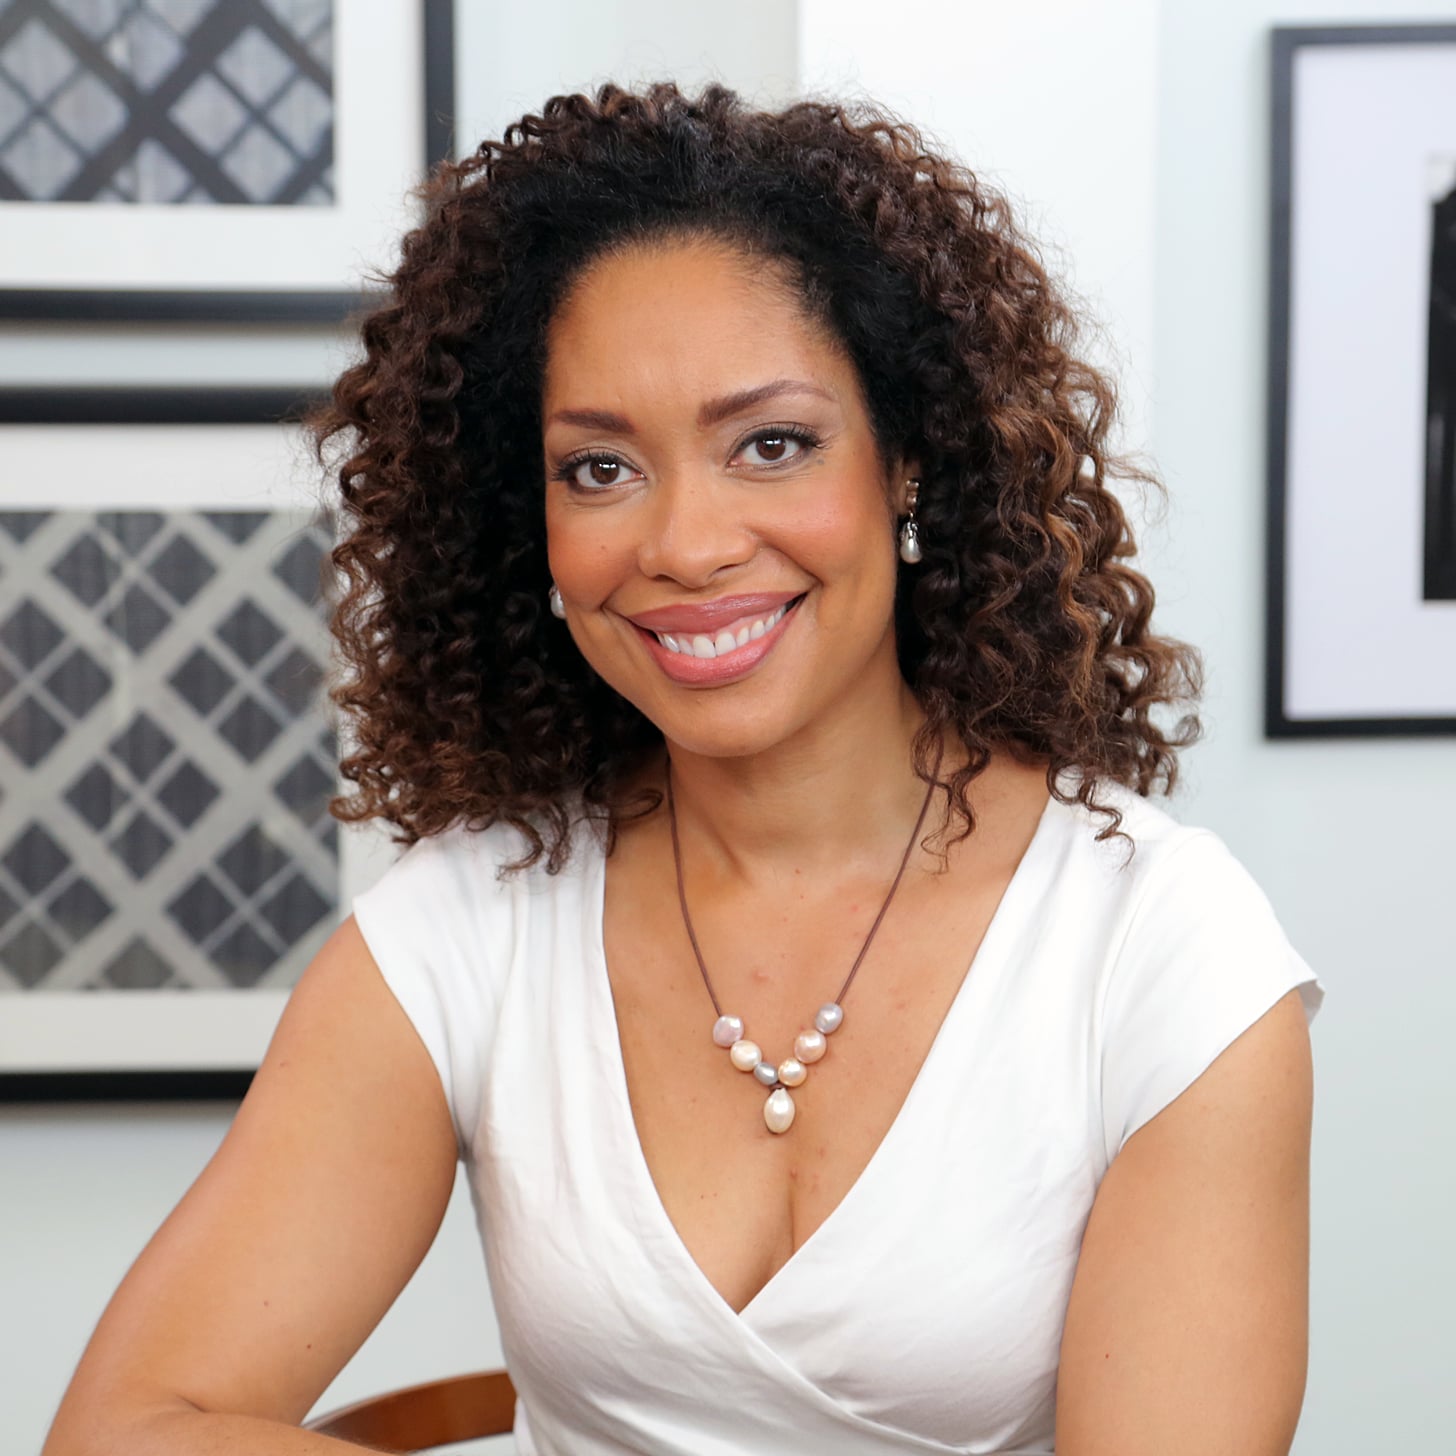 46 Gina Torres Nude Pictures Are Sure To Keep You Motivated 161